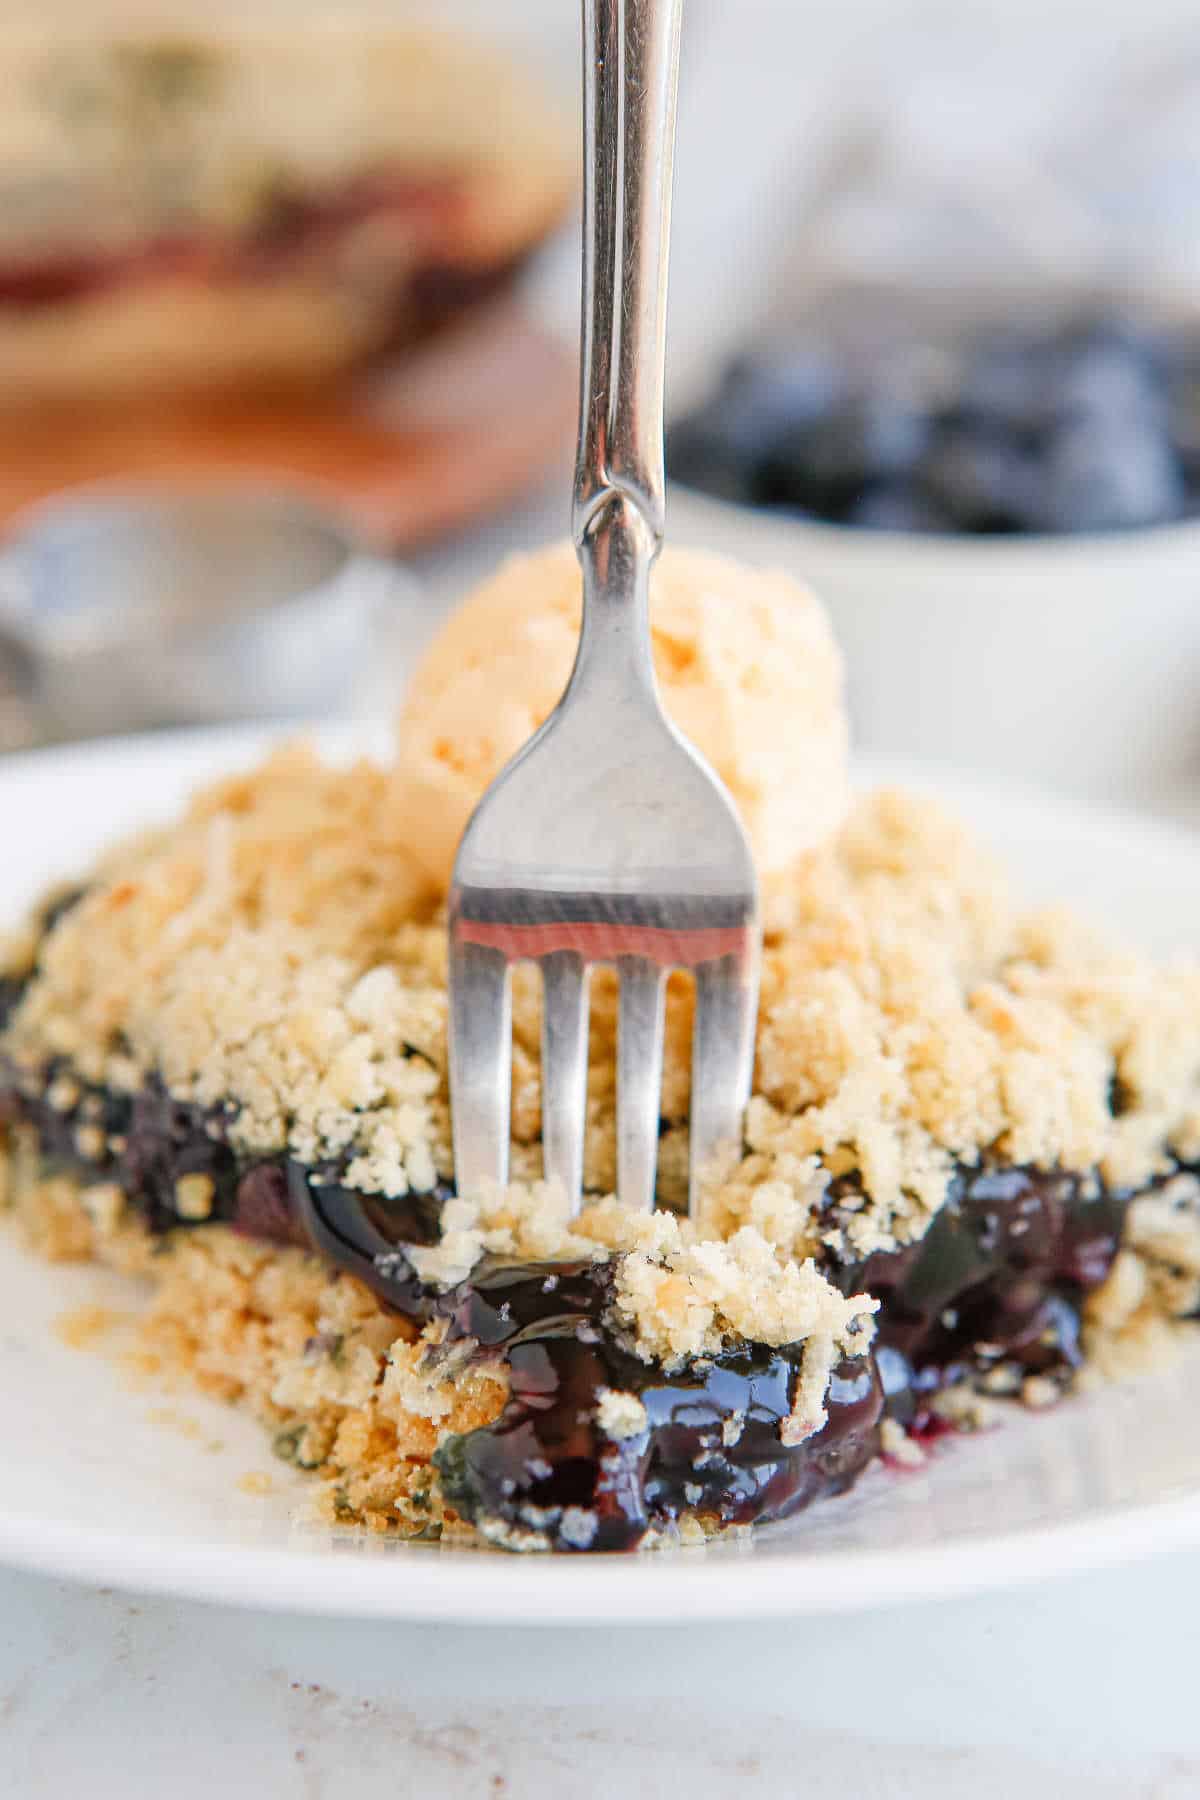 Blueberry crackle cake piece on a plate with a fork in it.